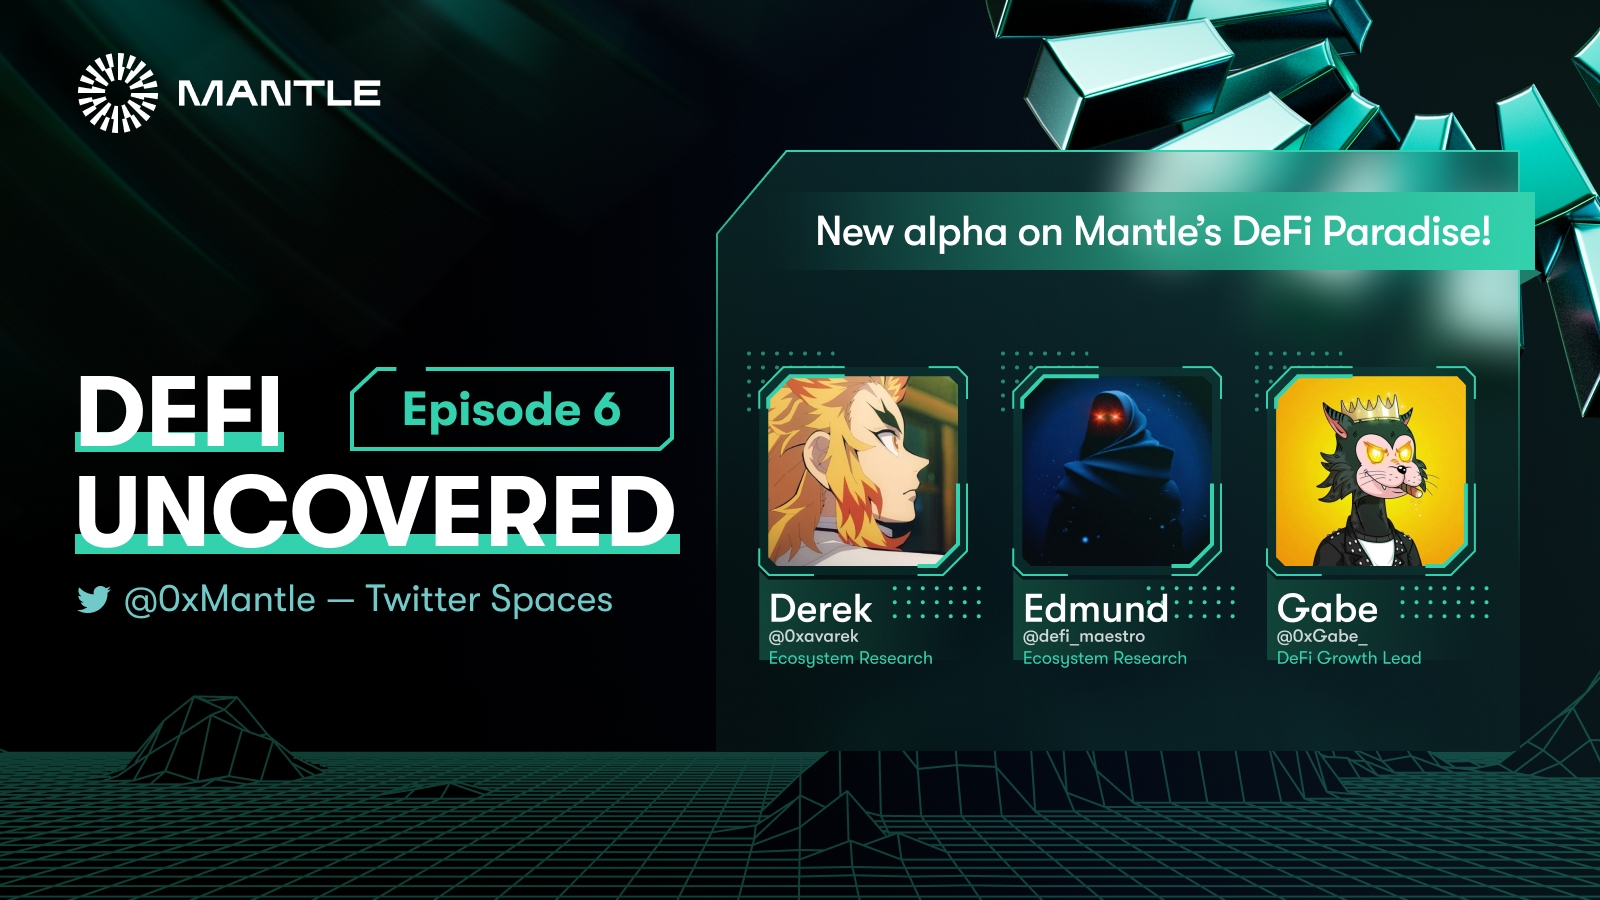 New in Mantle's DeFi Paradise - DeFi Uncovered Ep. 6 AMA Recap